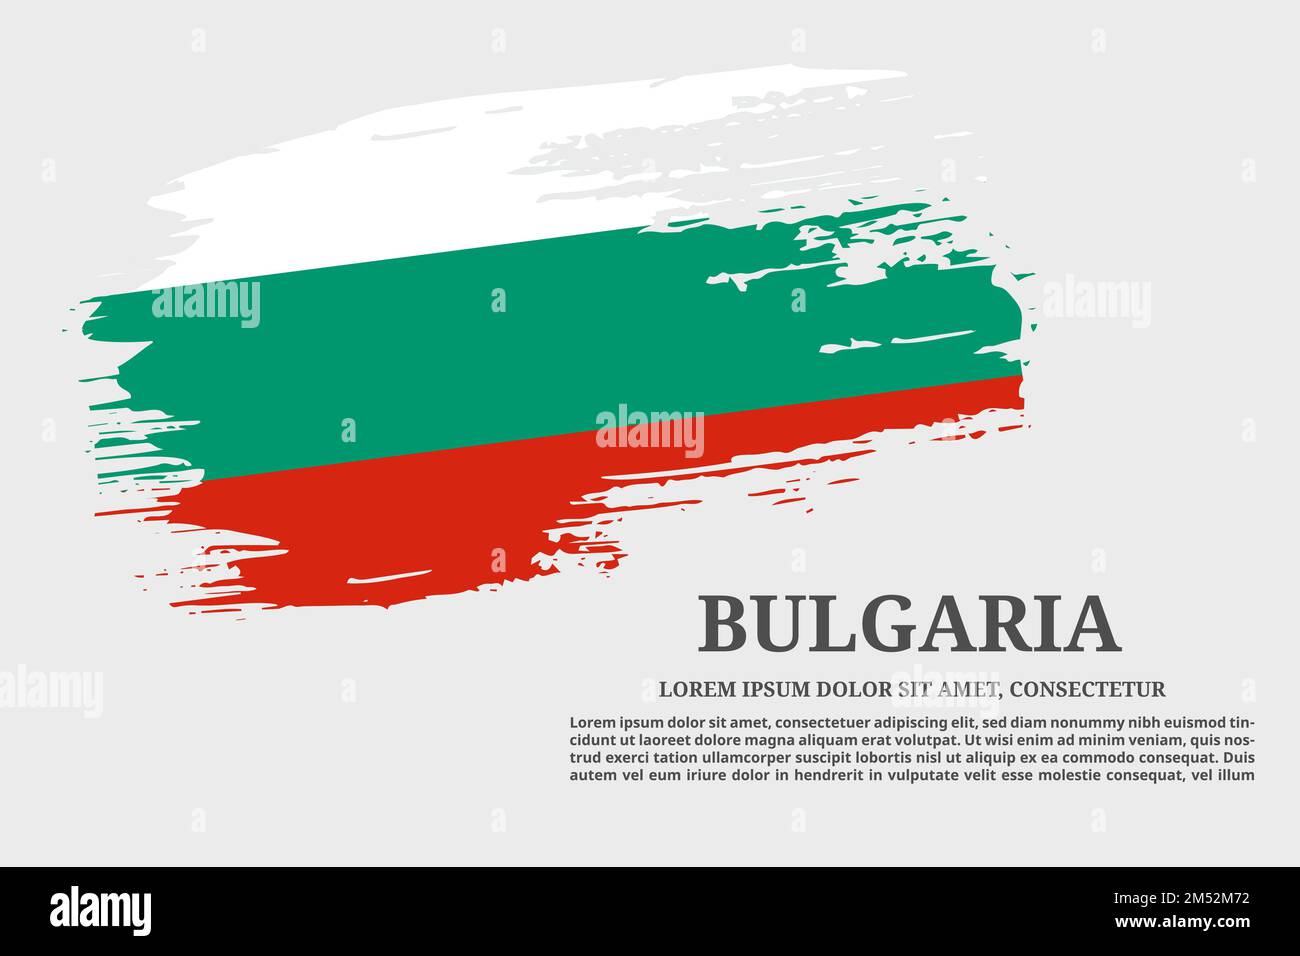 Bulgaria flag grunge brush and text poster, vector Stock Vector